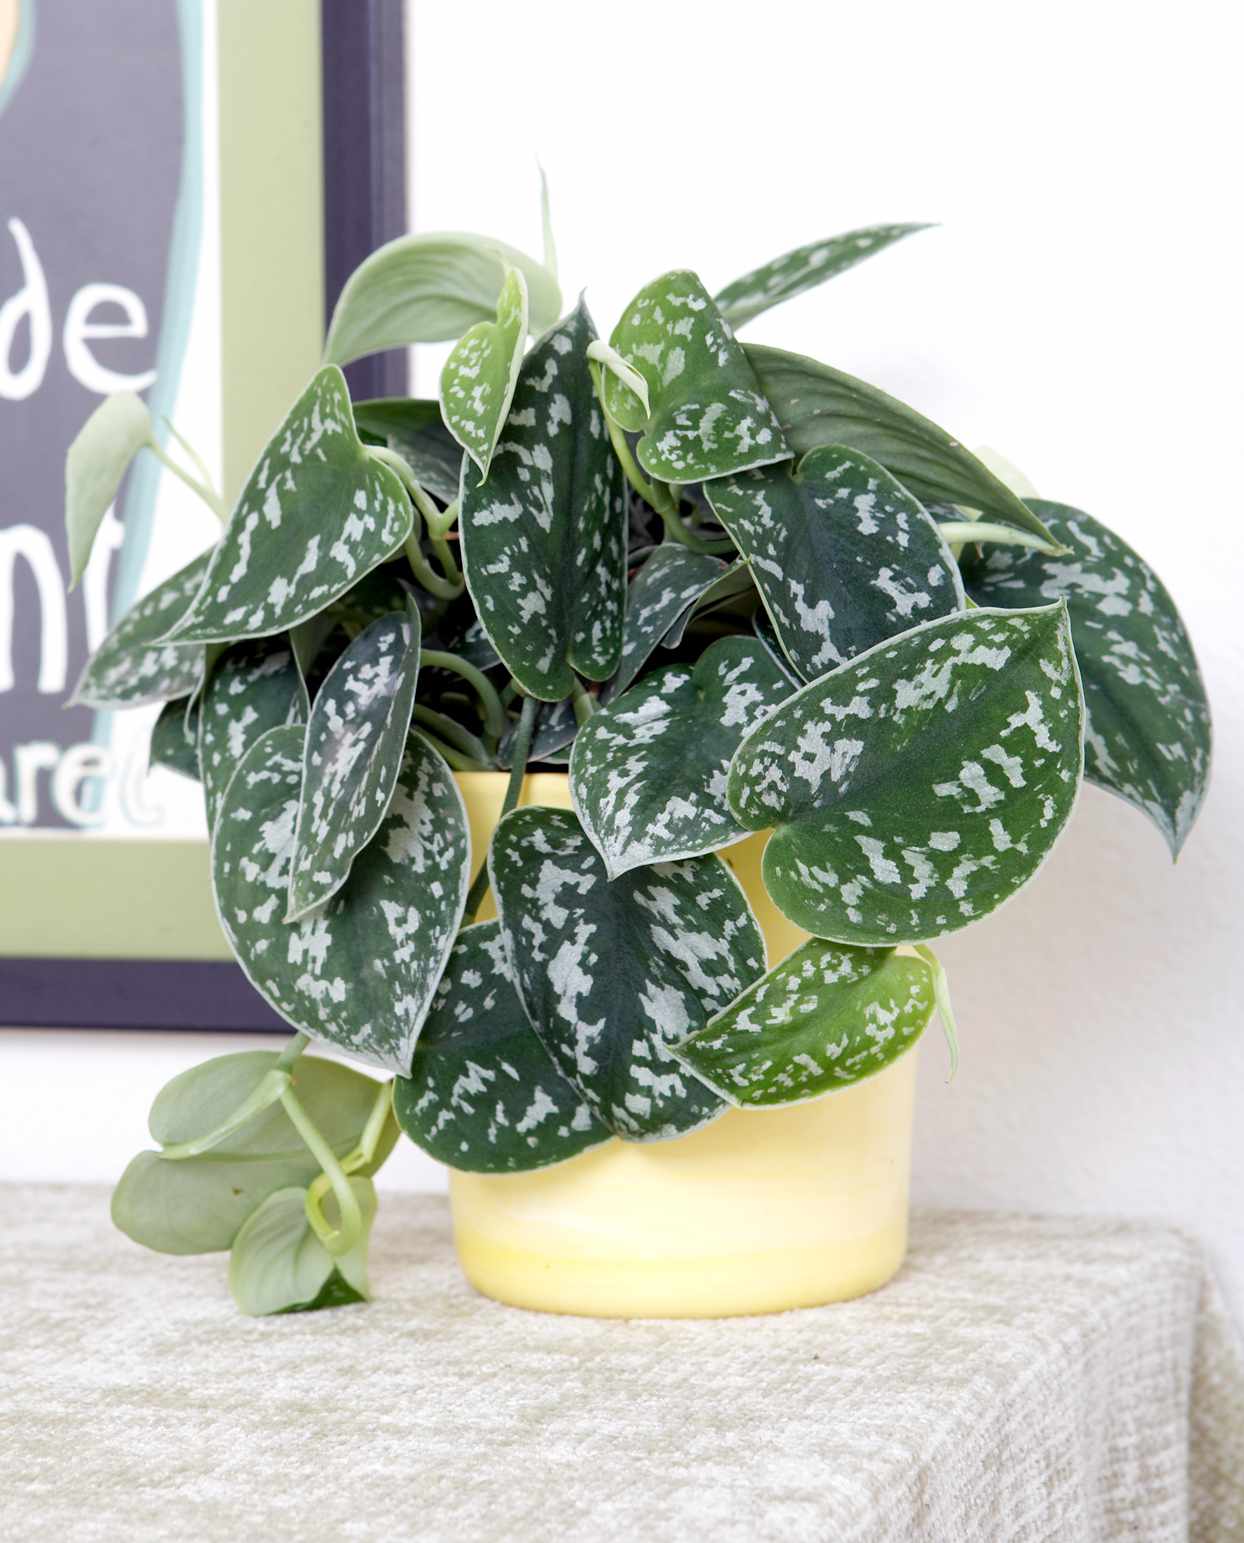 satin pothos houseplant in yellow container on table